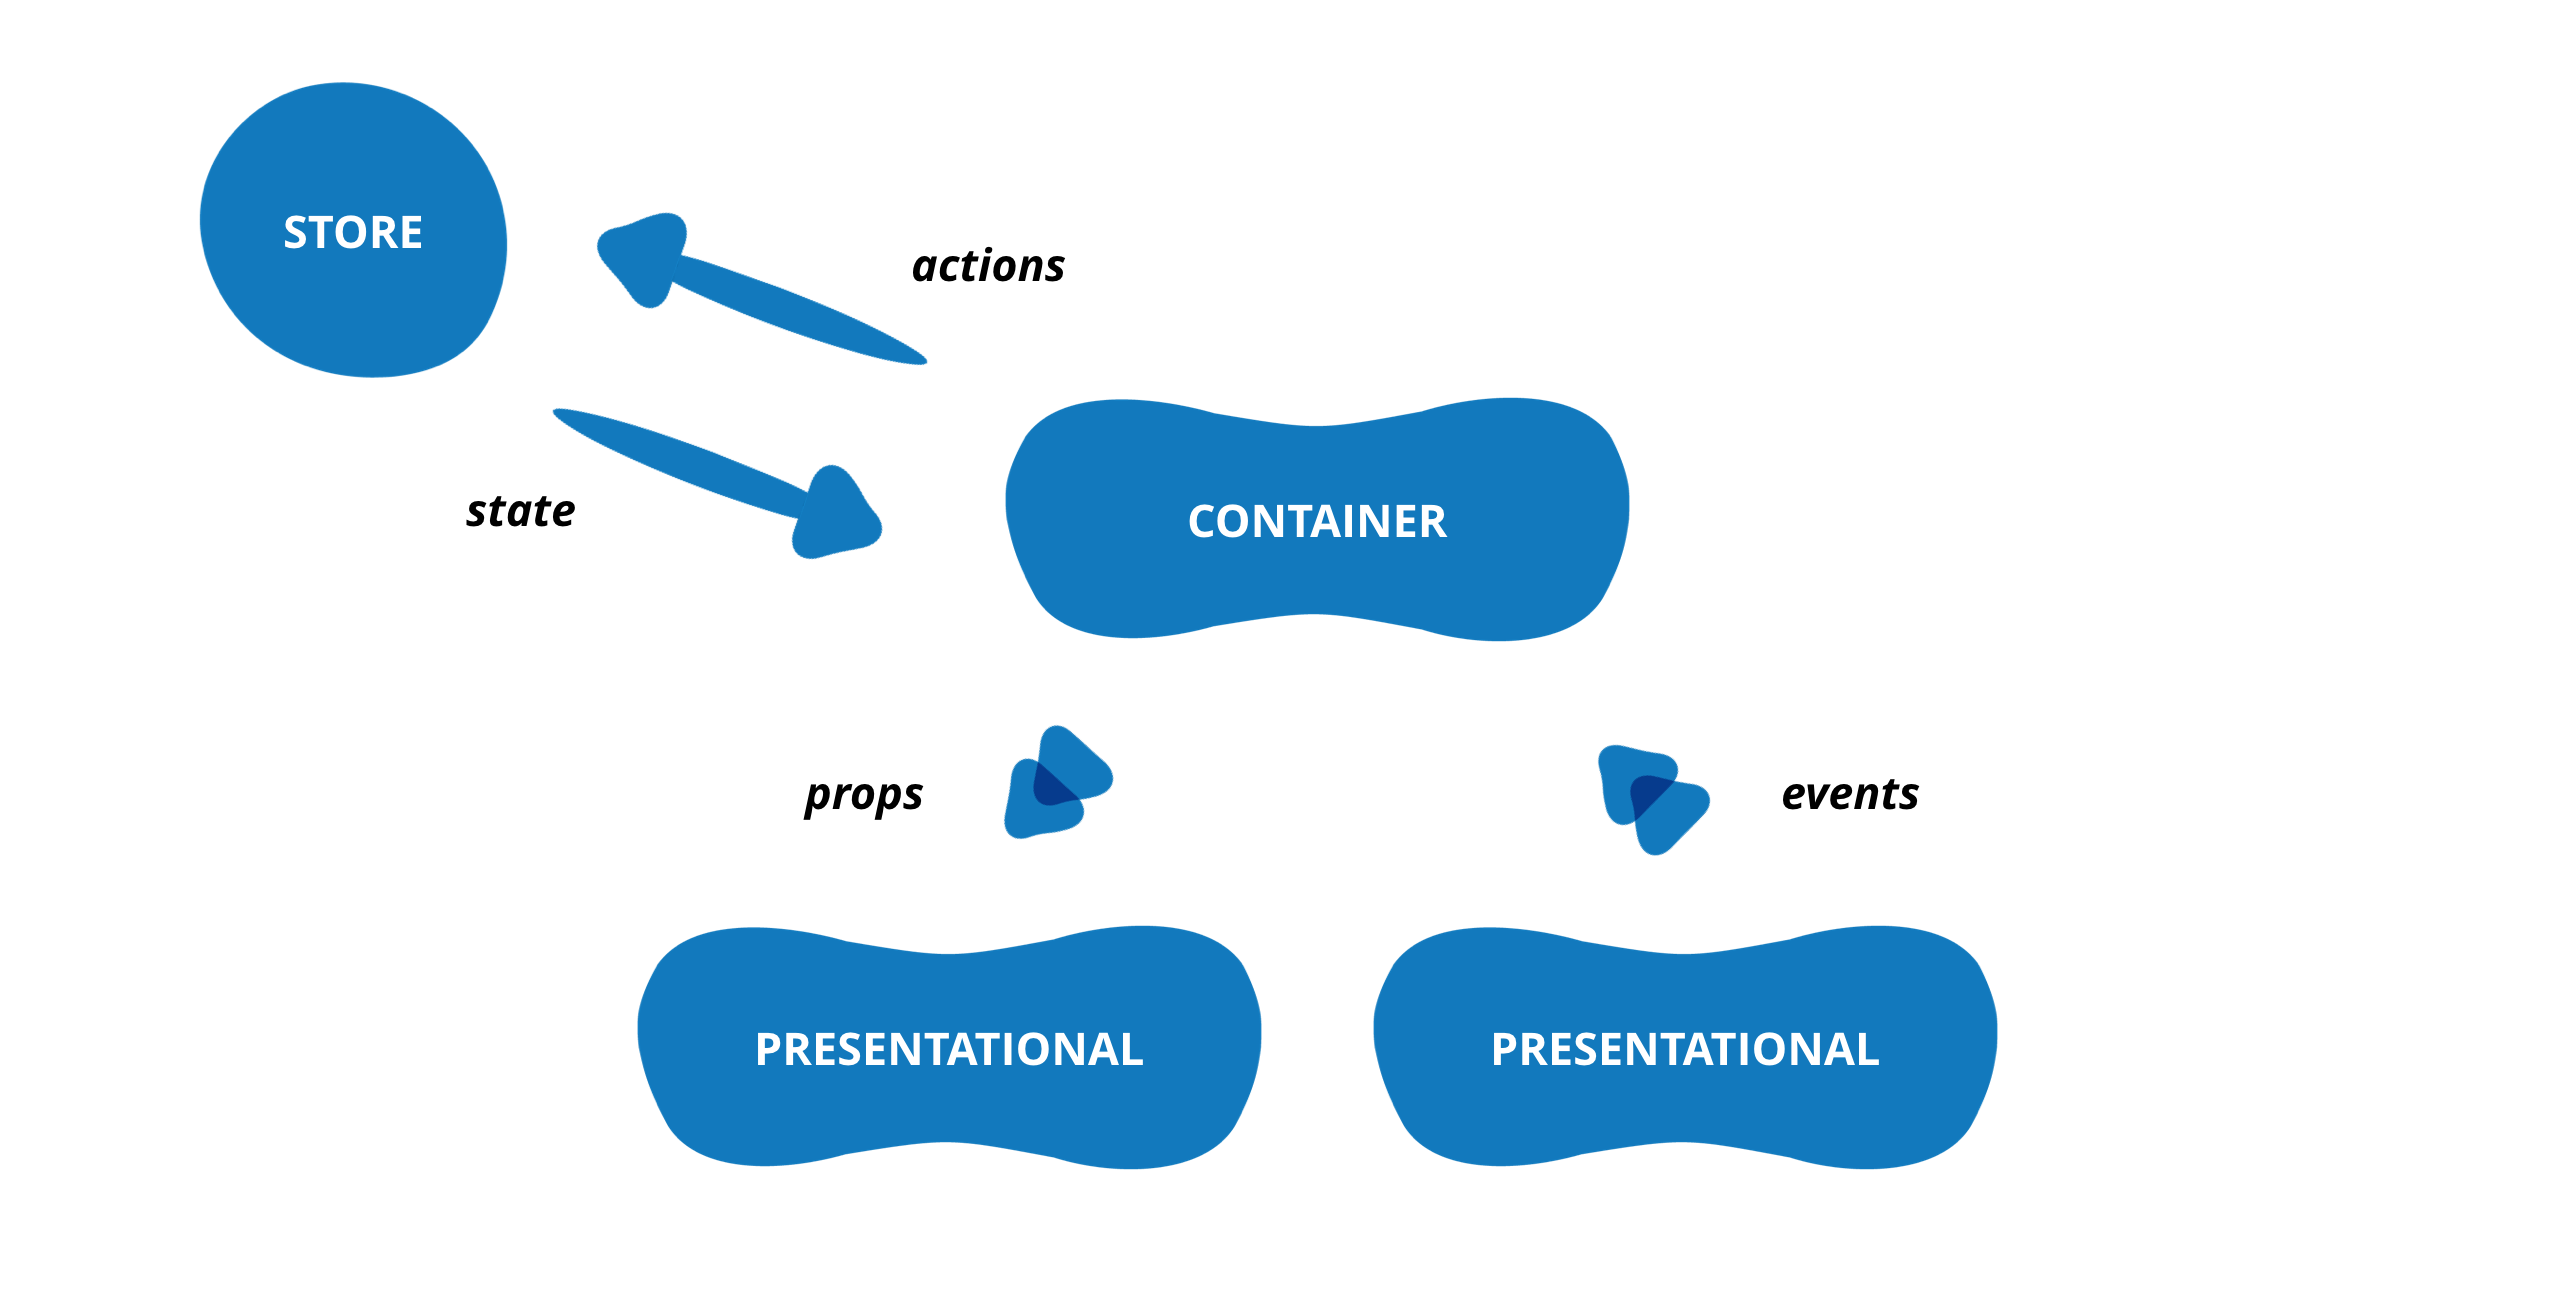 Presentational and Container components pattern